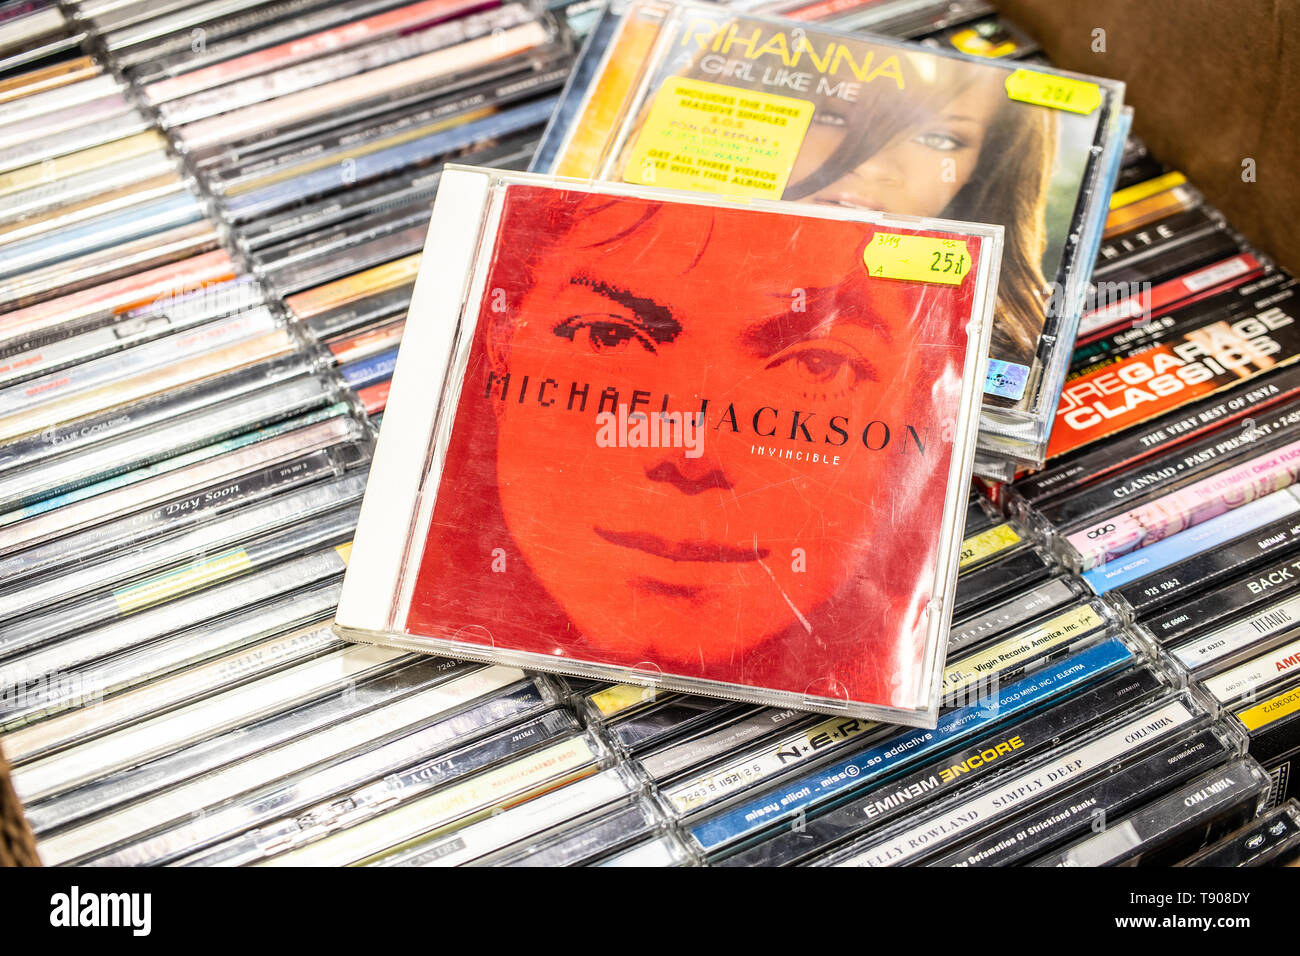 Nadarzyn, Poland, May 11, 2019: Michael Jackson CD album Invincible 2001 on display for sale, famous American musician and singer, collection of CDs Stock Photo